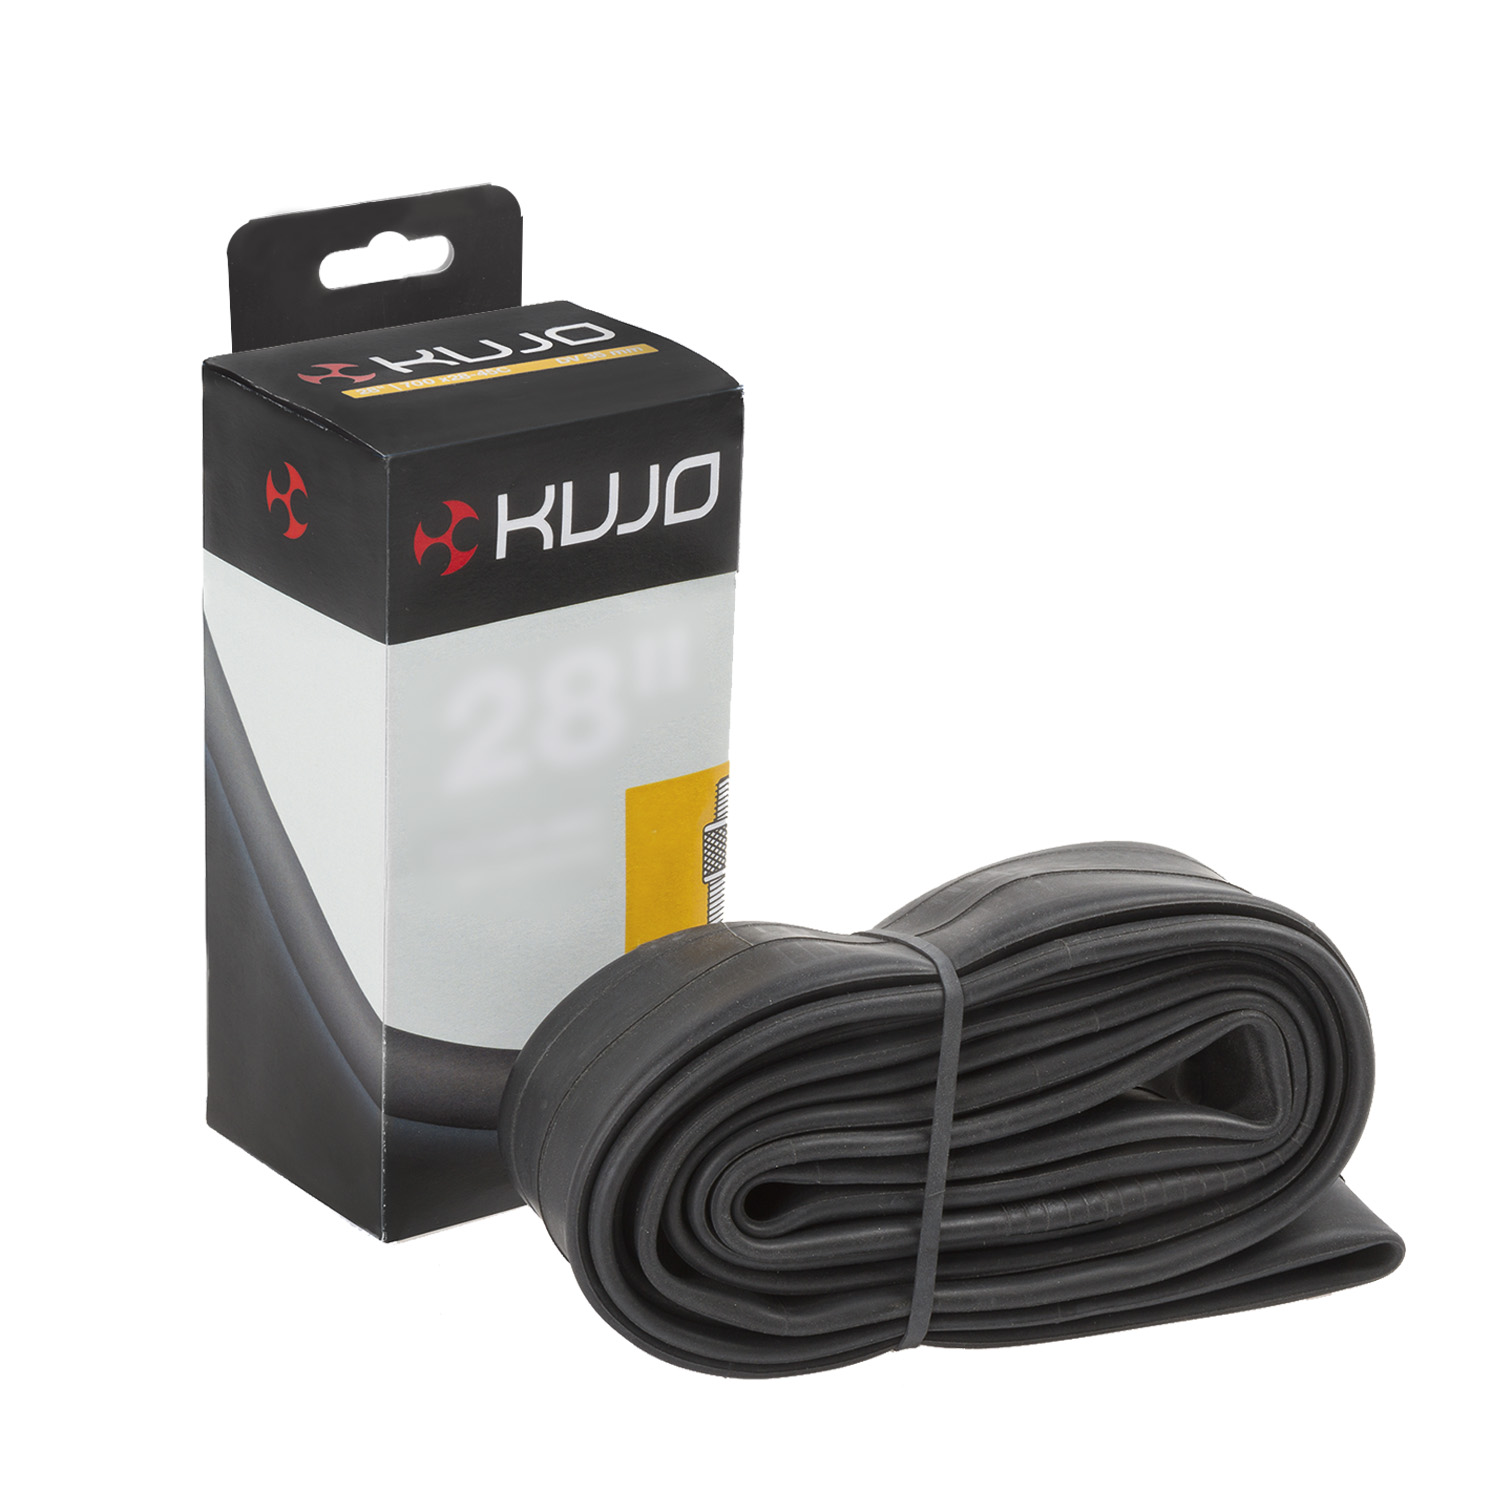 553039 – KUJO 700×28-45C bicycle tube- AVAILABLE IN SELECTED BIKE SHOPS